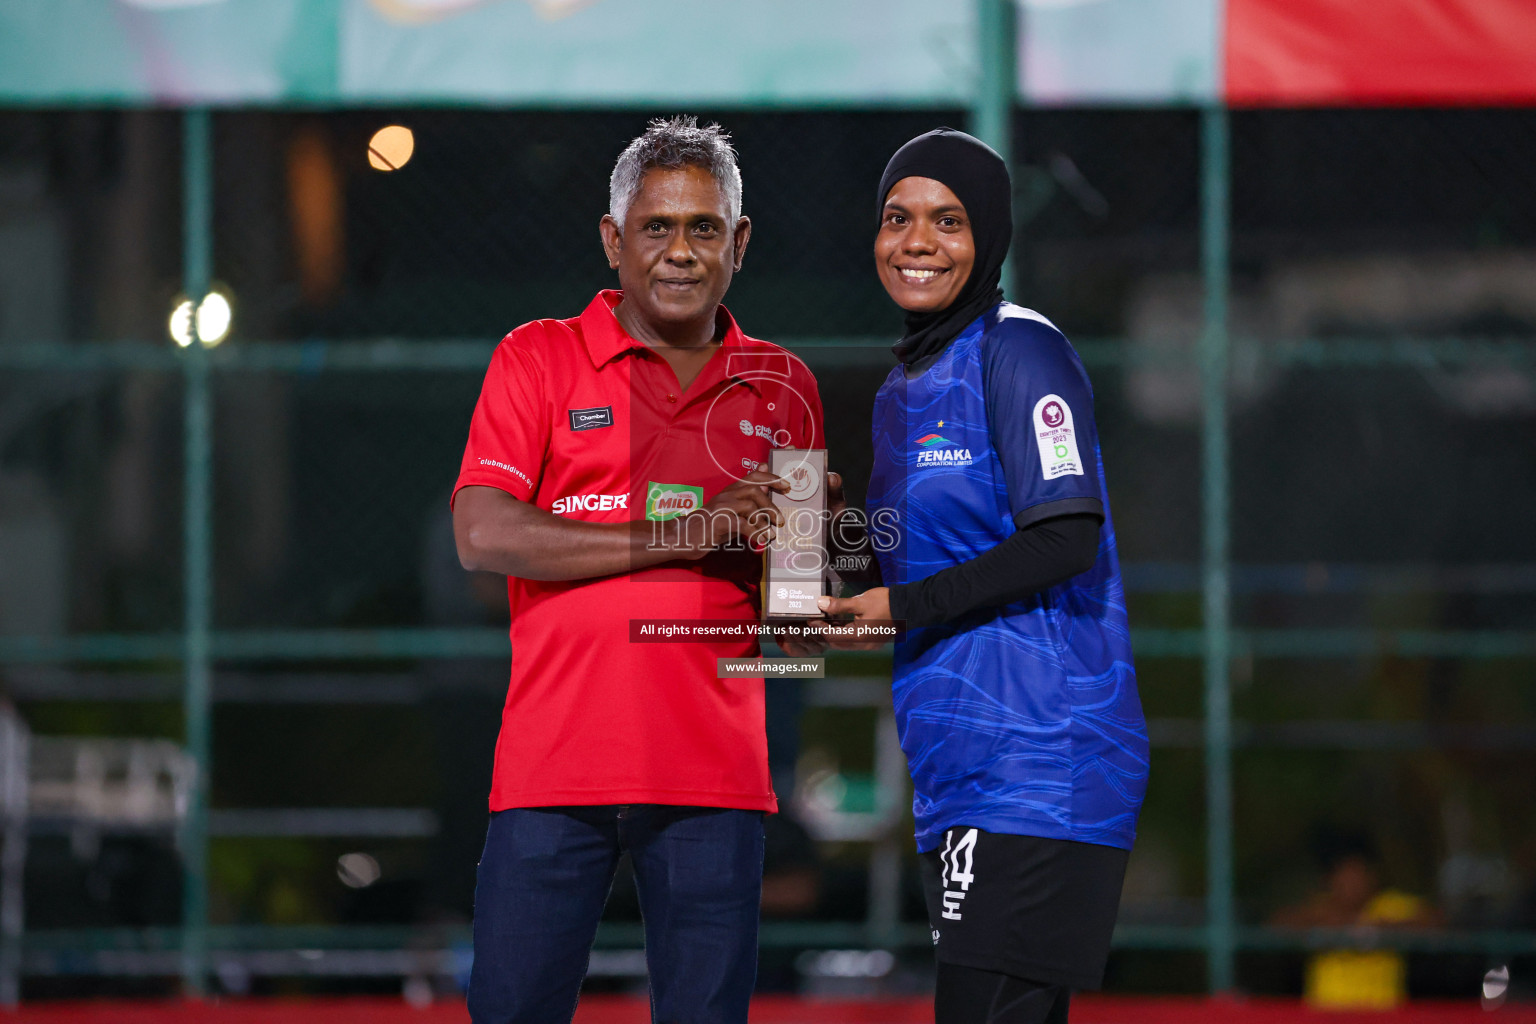 Police Club vs Fenaka in Final of Eighteen Thirty 2023 held in Hulhumale, Maldives, on Tuesday, 22nd August 2023. Photos: Nausham Waheed / images.mv